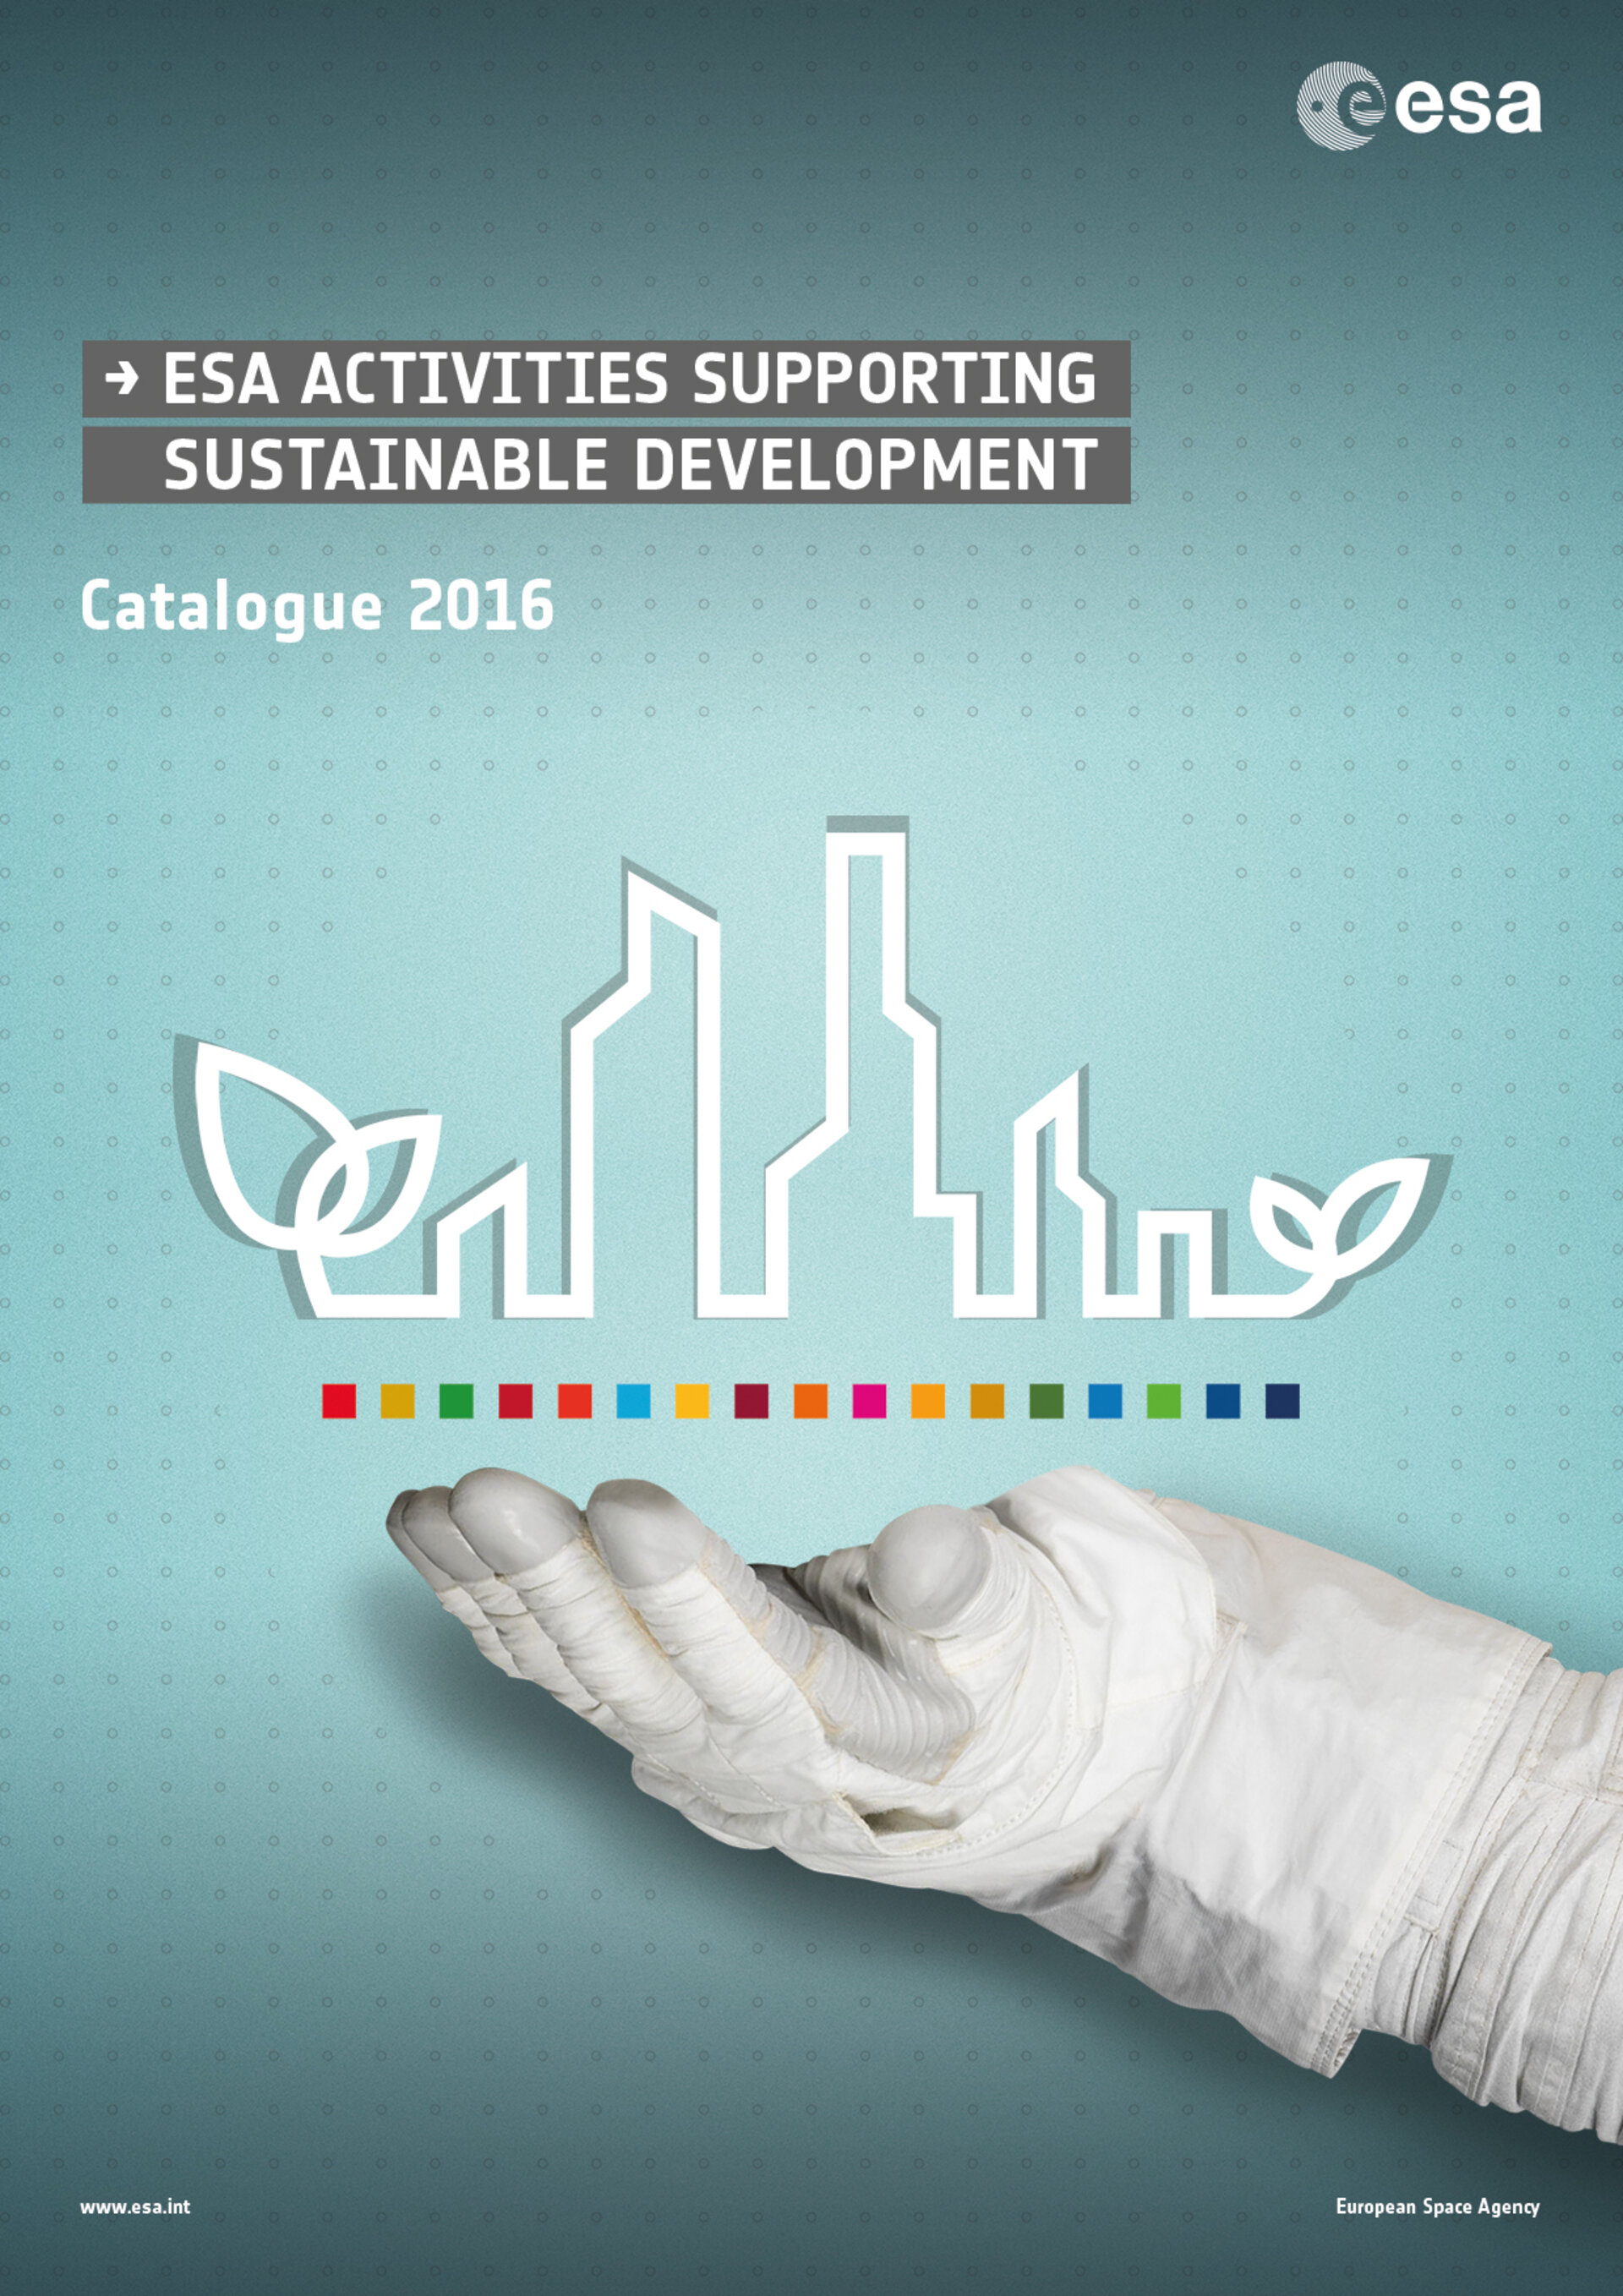 ESA activities supporting the SDGs